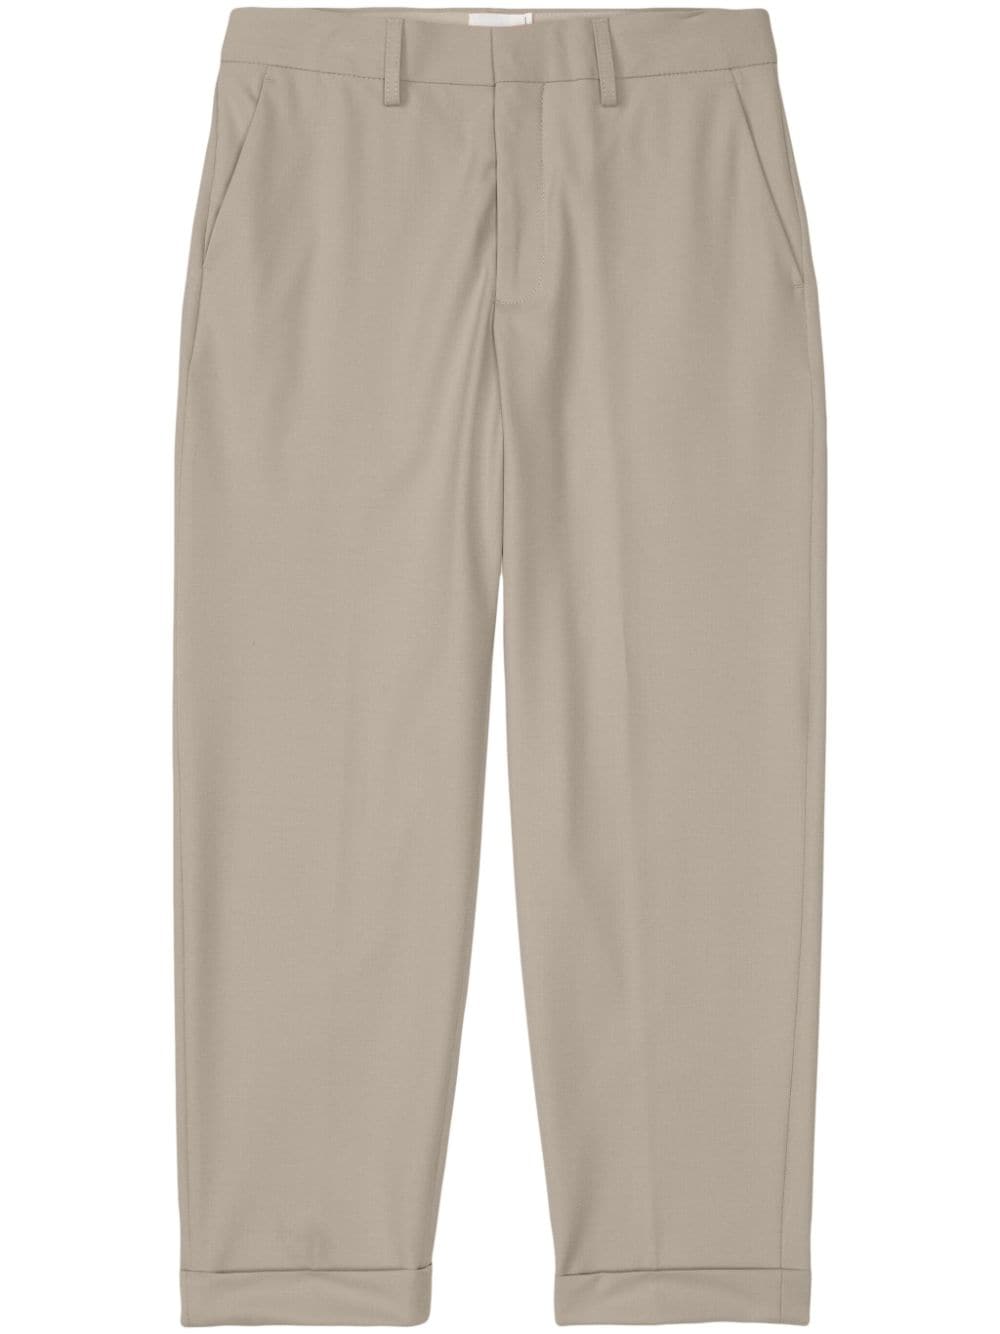 Auckley cropped trousers